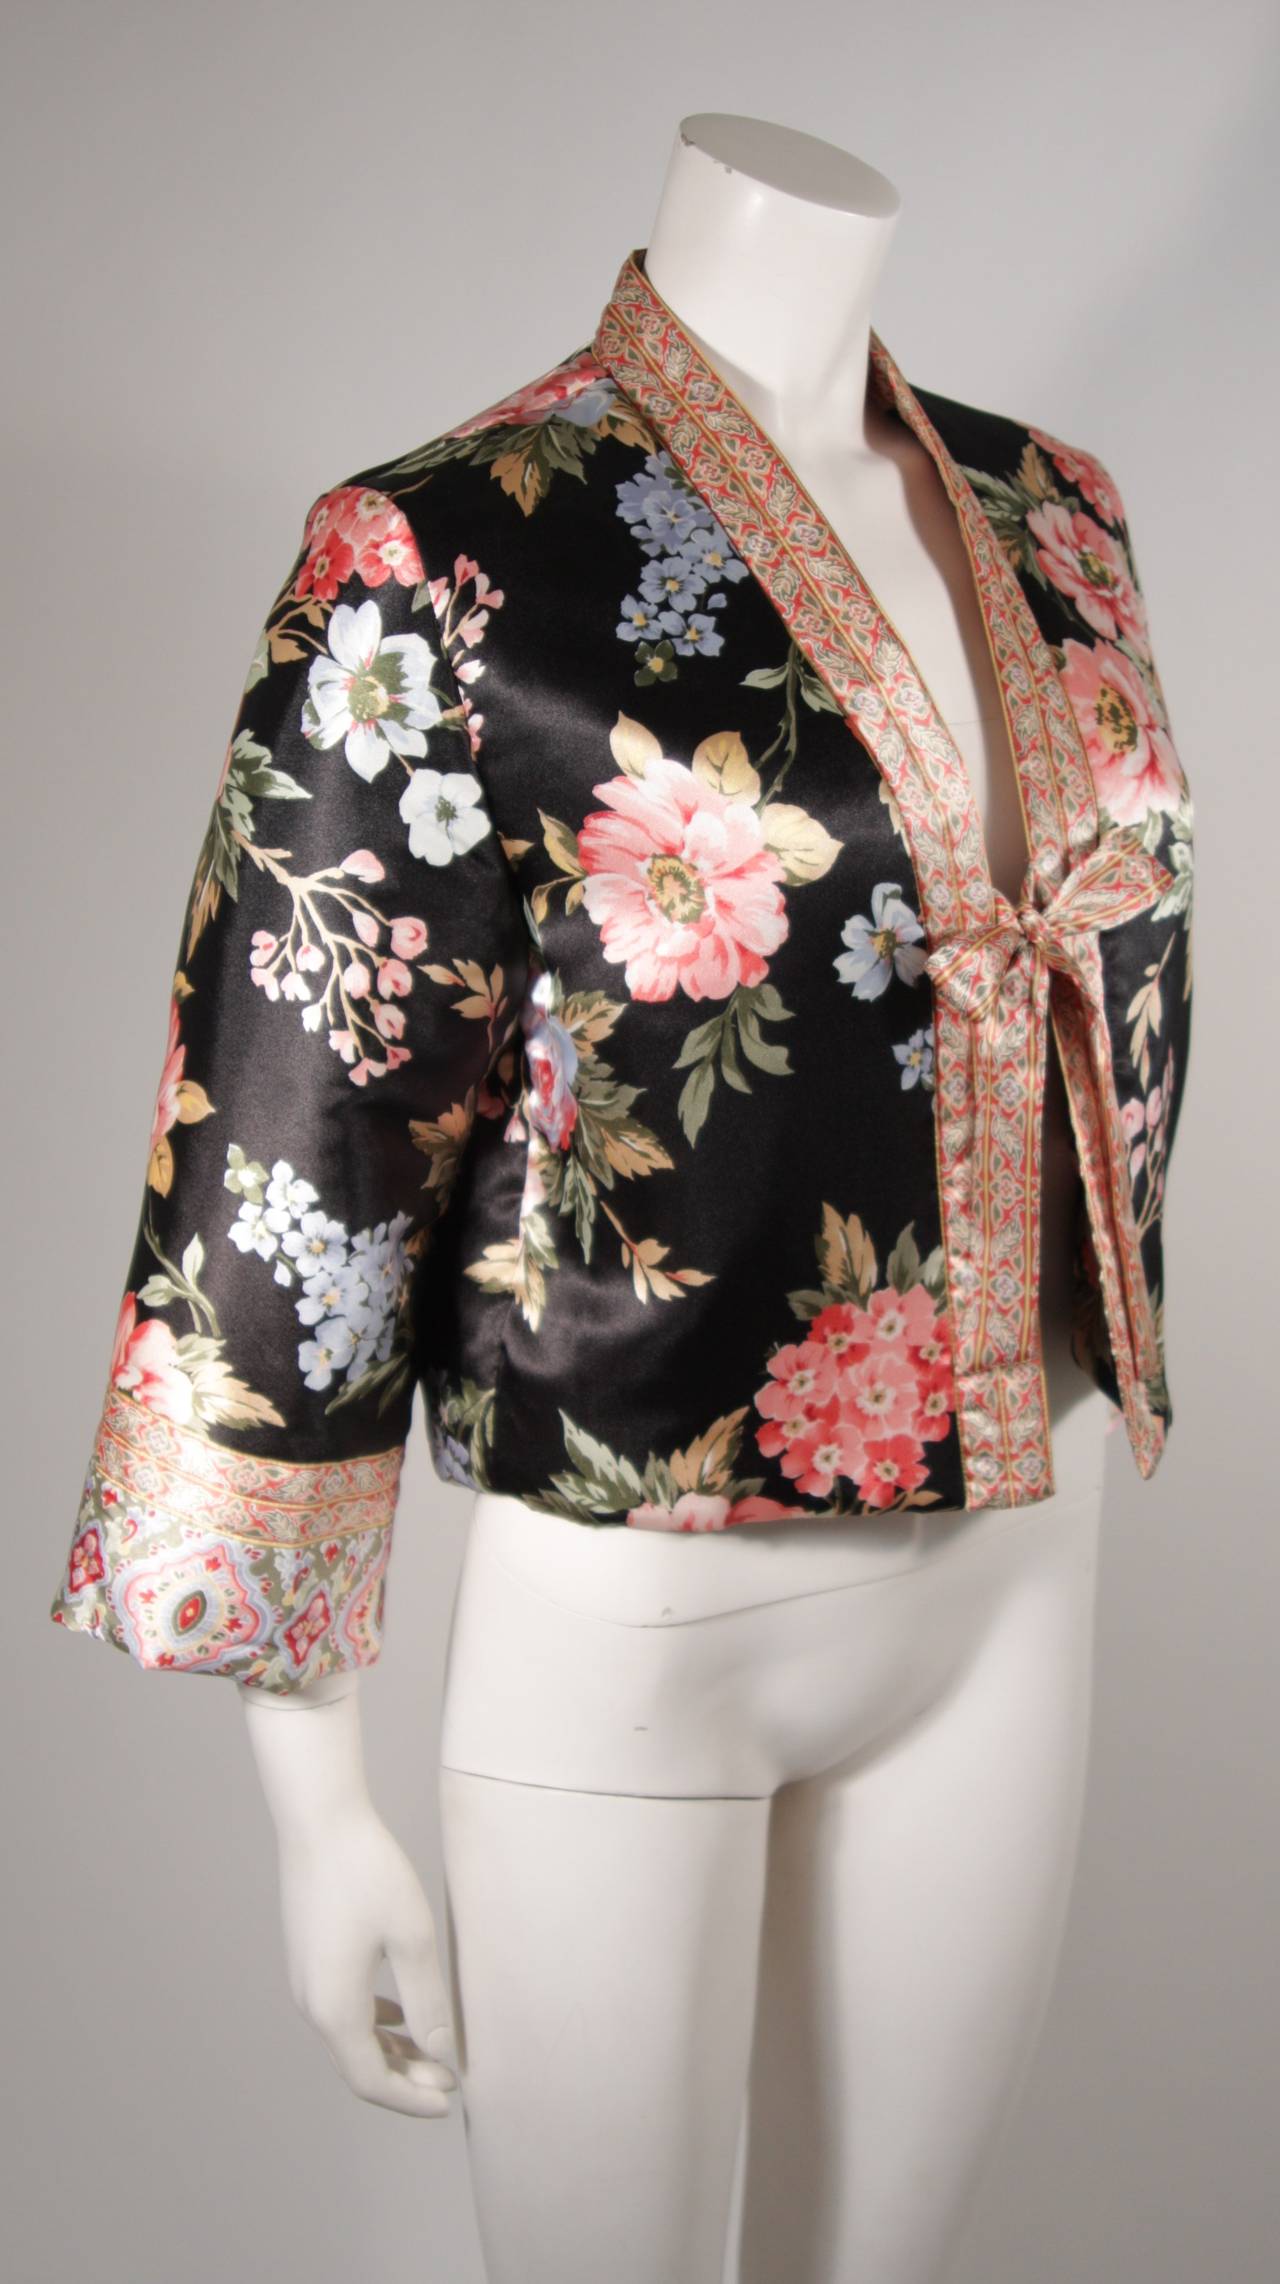 This Oscar De La Renta jacket is available for viewing at our Beverly Hills Boutique. The jacket is composed of a floral print silk. The basic tie front style is complimented by the lightweight puff design. Features one interior pocket. 

Measures